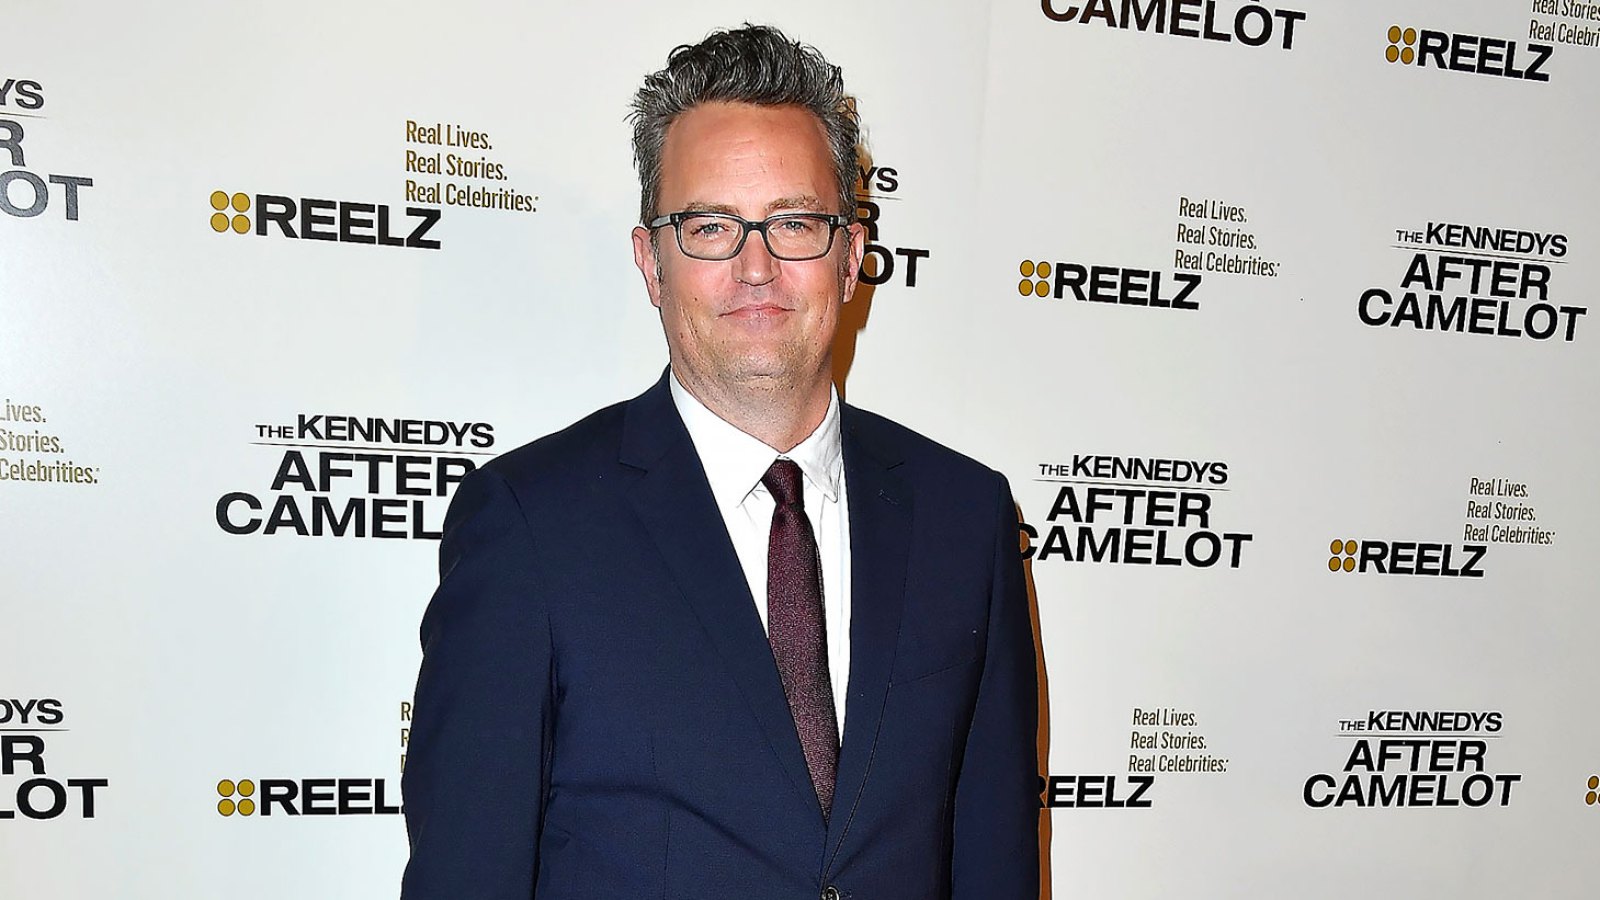 Friends Cocreators Were Concerned About Matthew Perry Over the Years